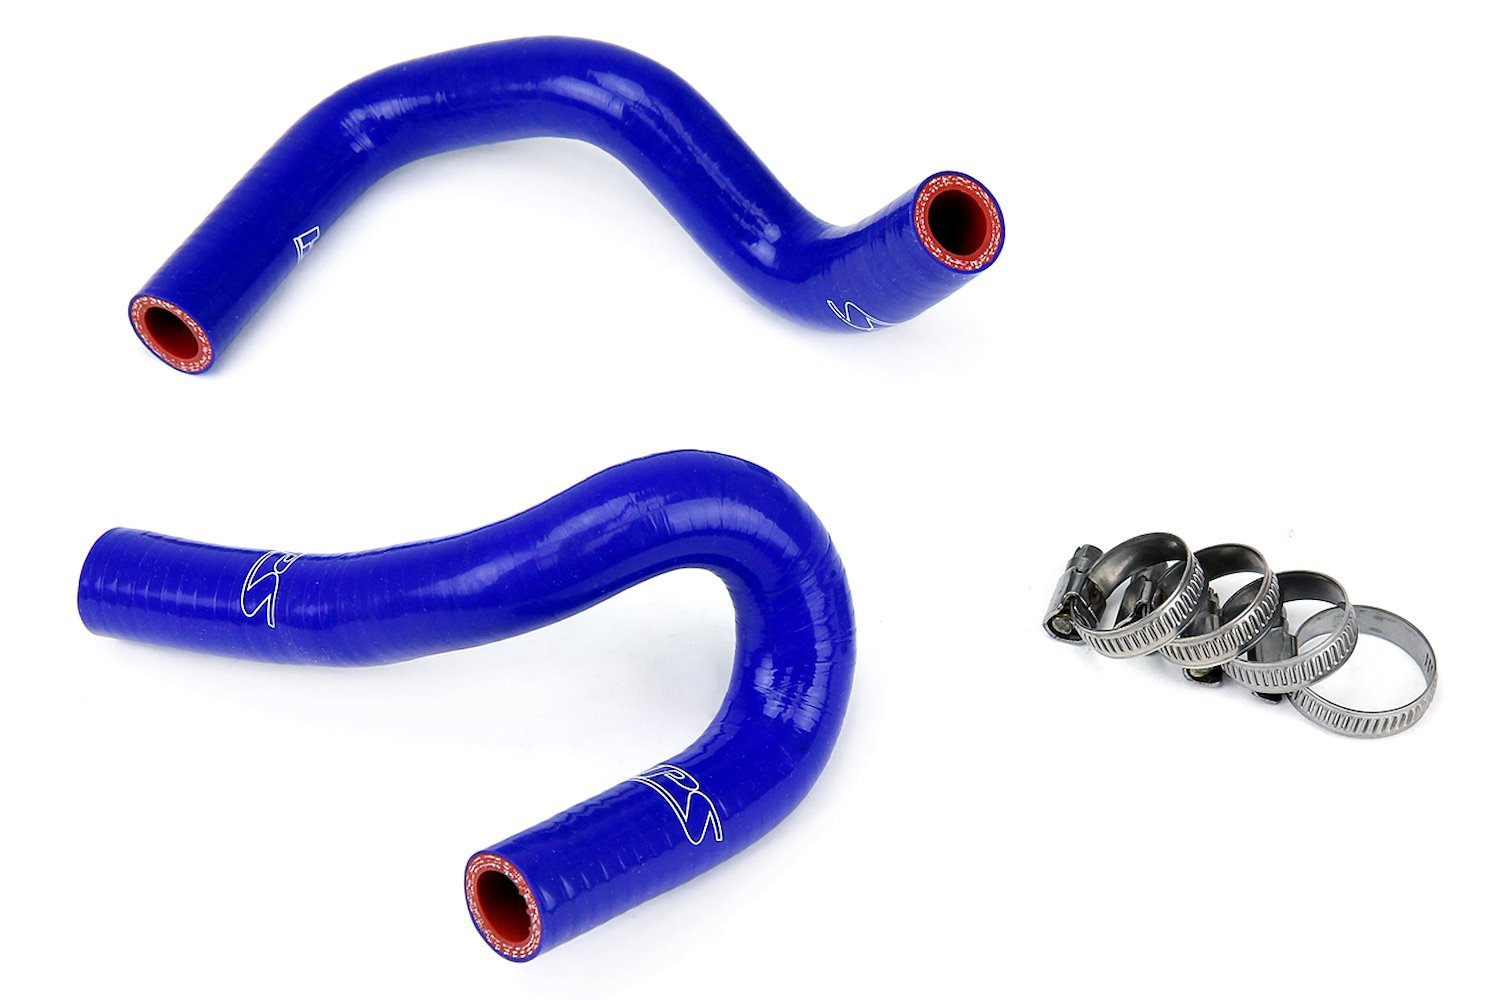 57-1309-BLUE Heater Hose Kit, High-Temp 3-Ply Reinforced Silicone, Replace OEM Rubber Heater Coolant Hoses